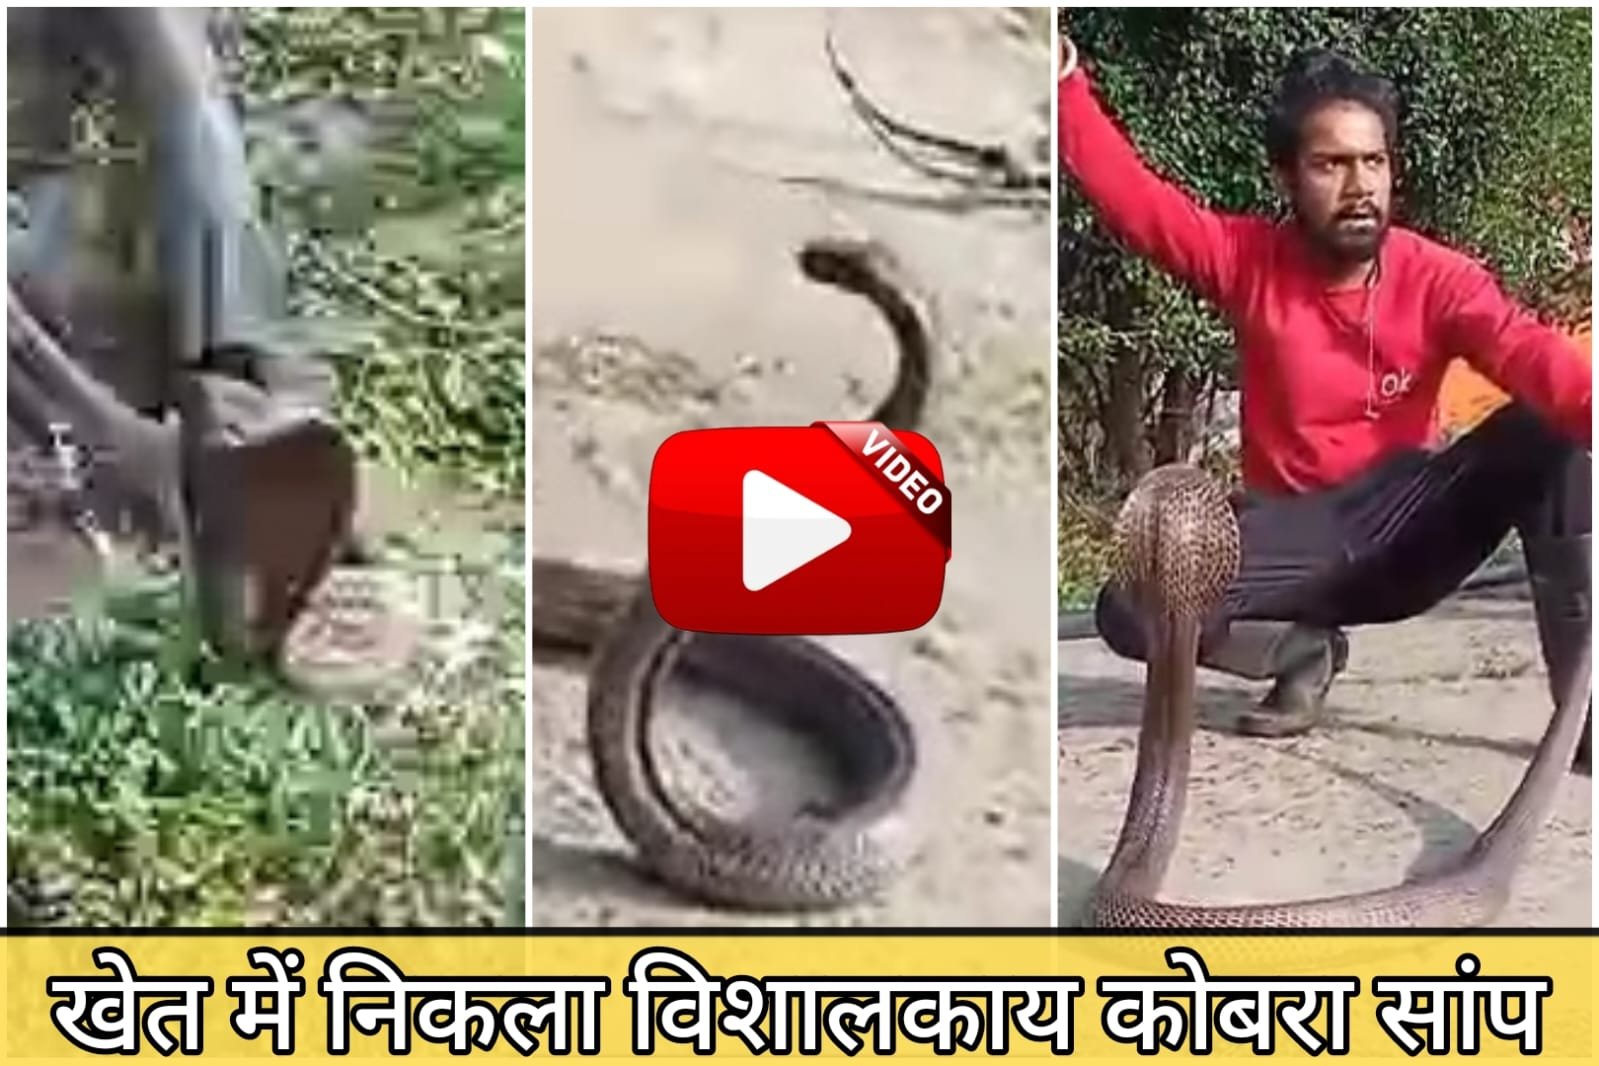 Cobra Ka Video - When I saw a hiss coming from the field, an eight feet long cobra came out.